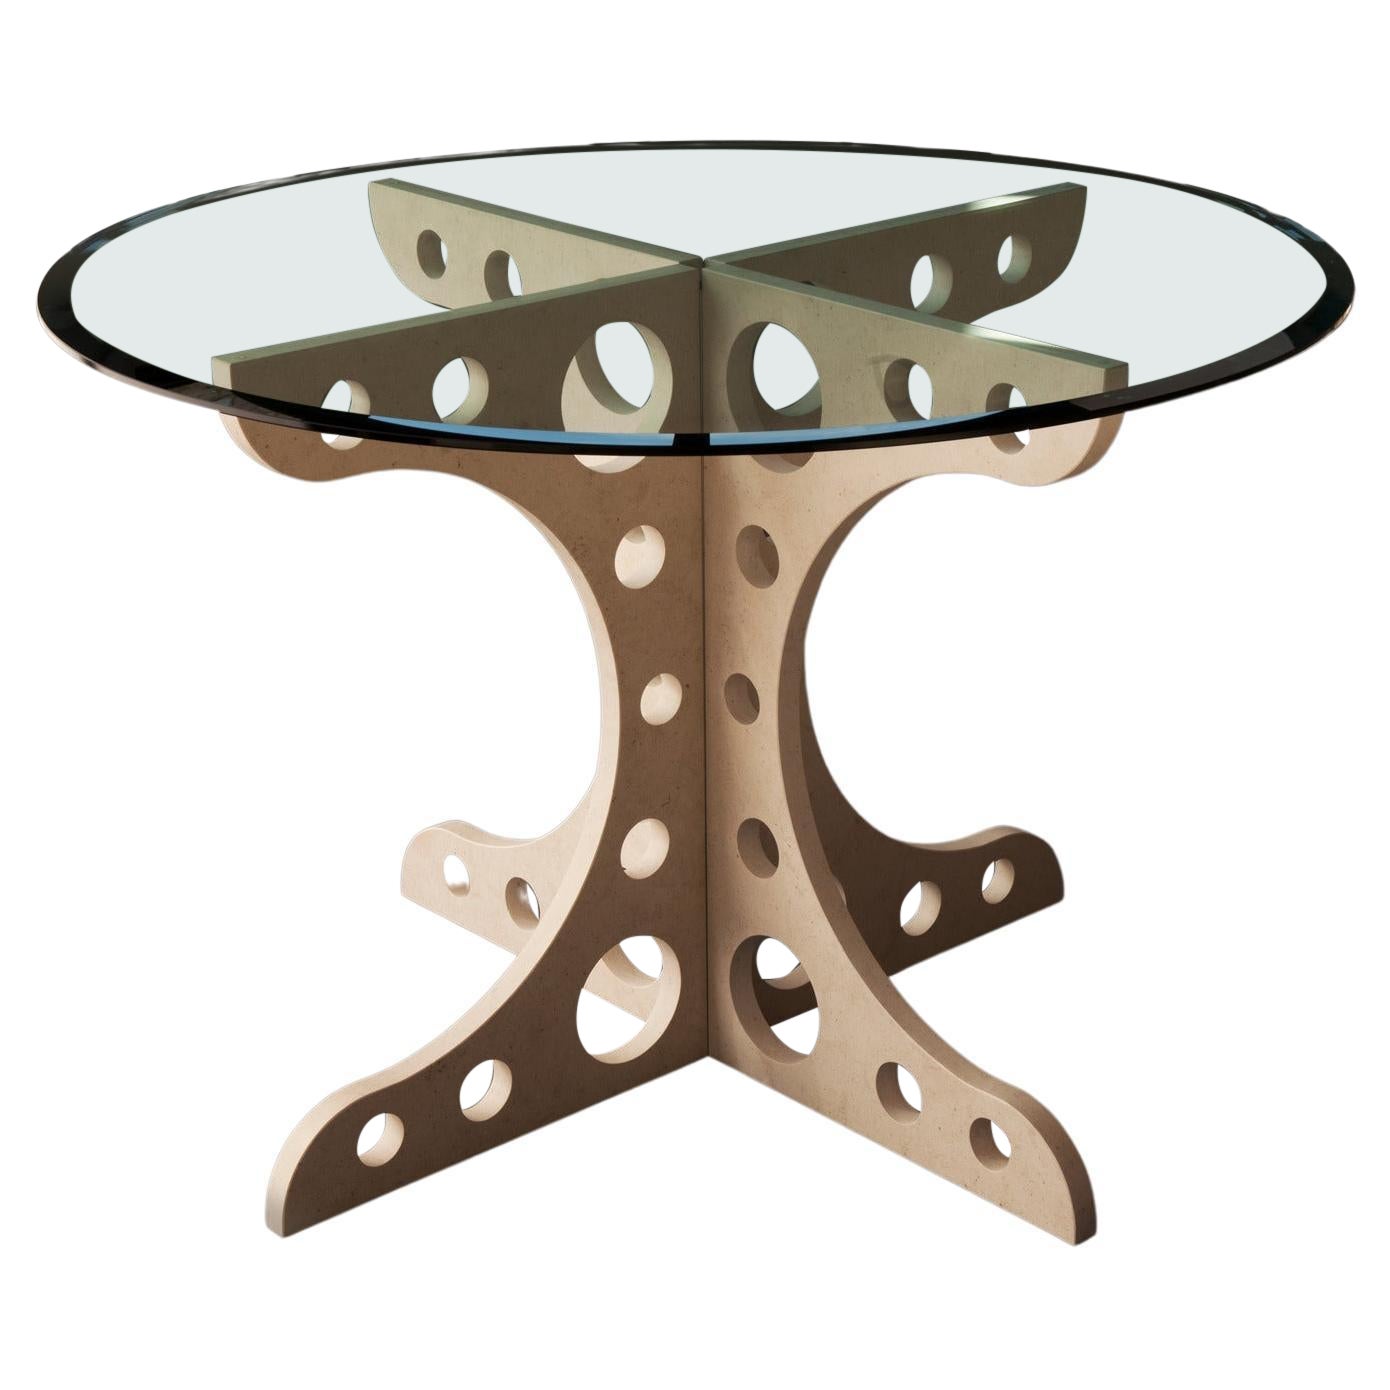 Ma-Mi, 21st Century Veselye Marble and Glass Round Coffee Table - Empty holes For Sale